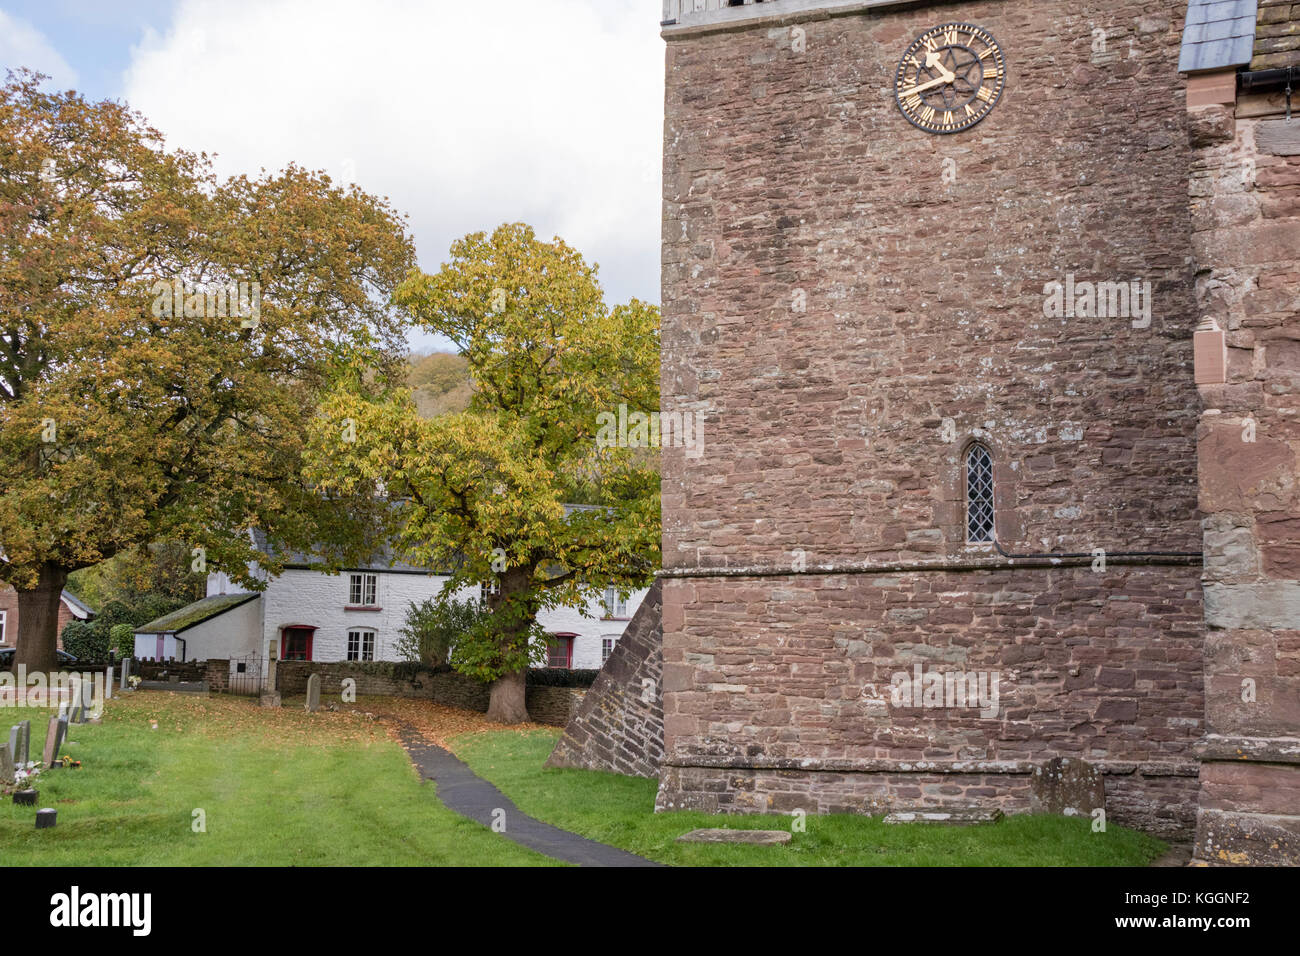 The Church of St Bridget or St Bride in the village of Skenfrith, Monmouthshire, Wales, UK Stock Photo